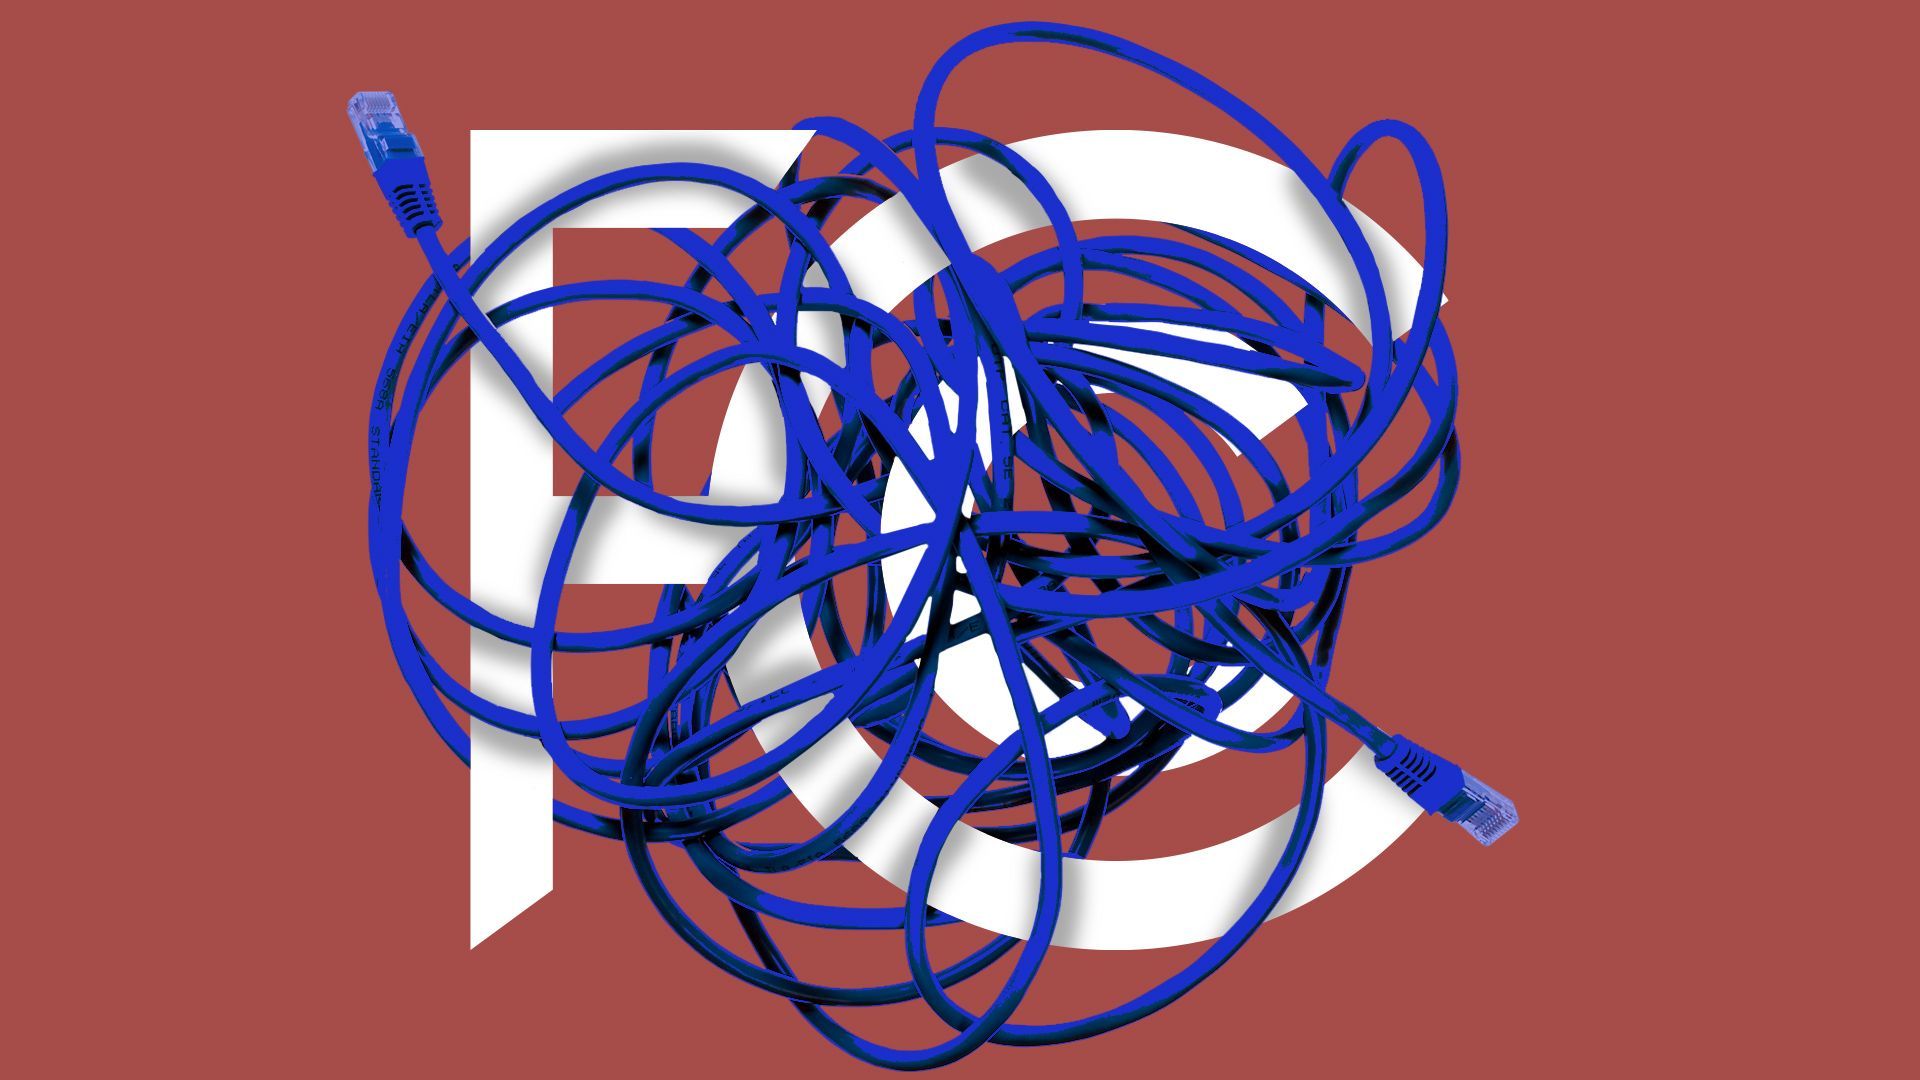 Illustration of the FCC logo tangled in ethernet cable wires. 